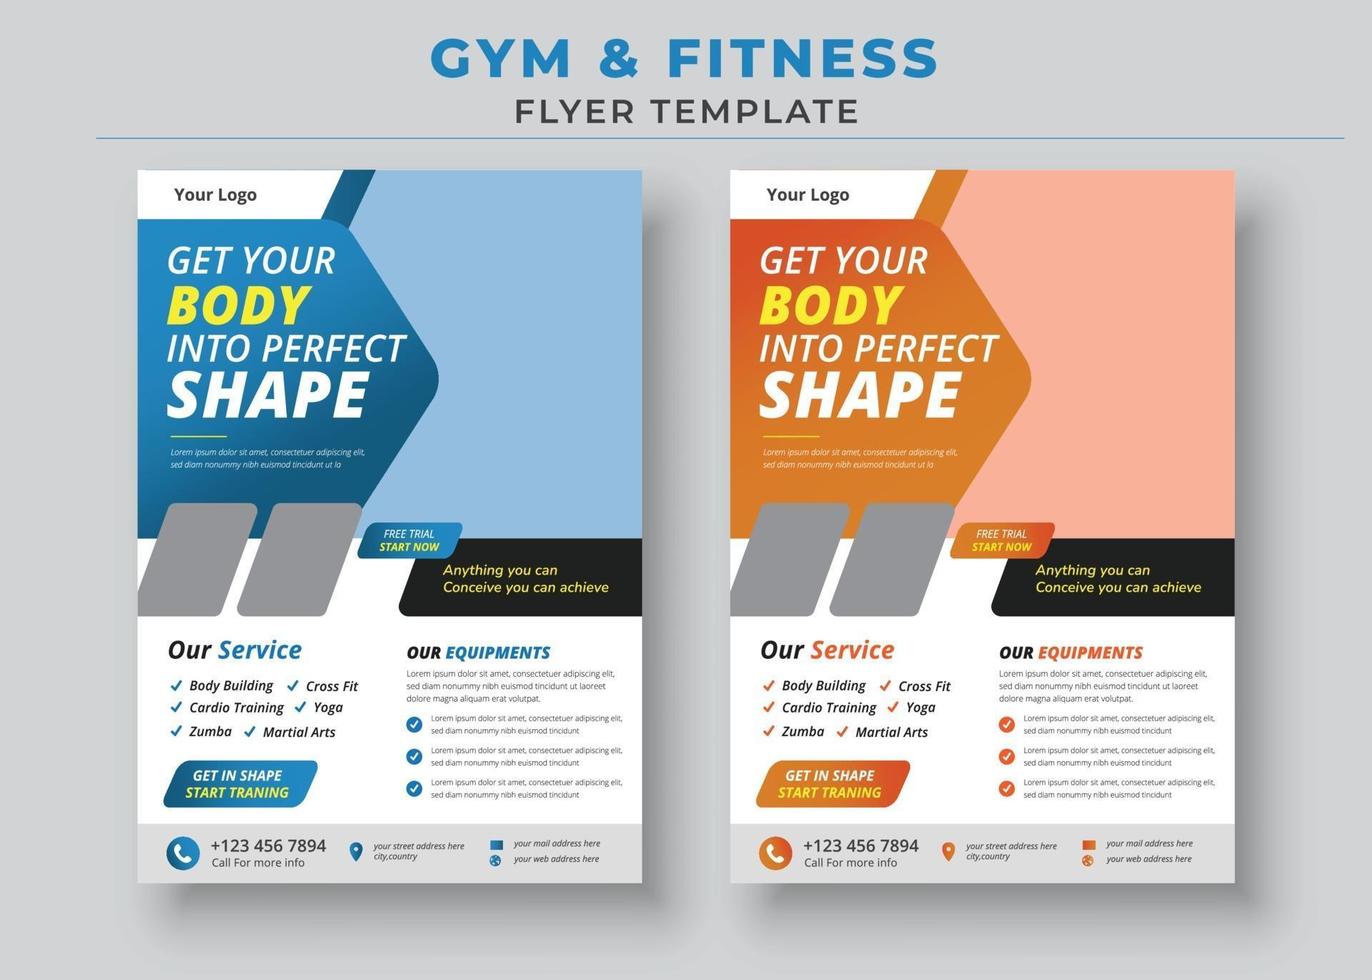 Gym Fitness Flyer Template vector